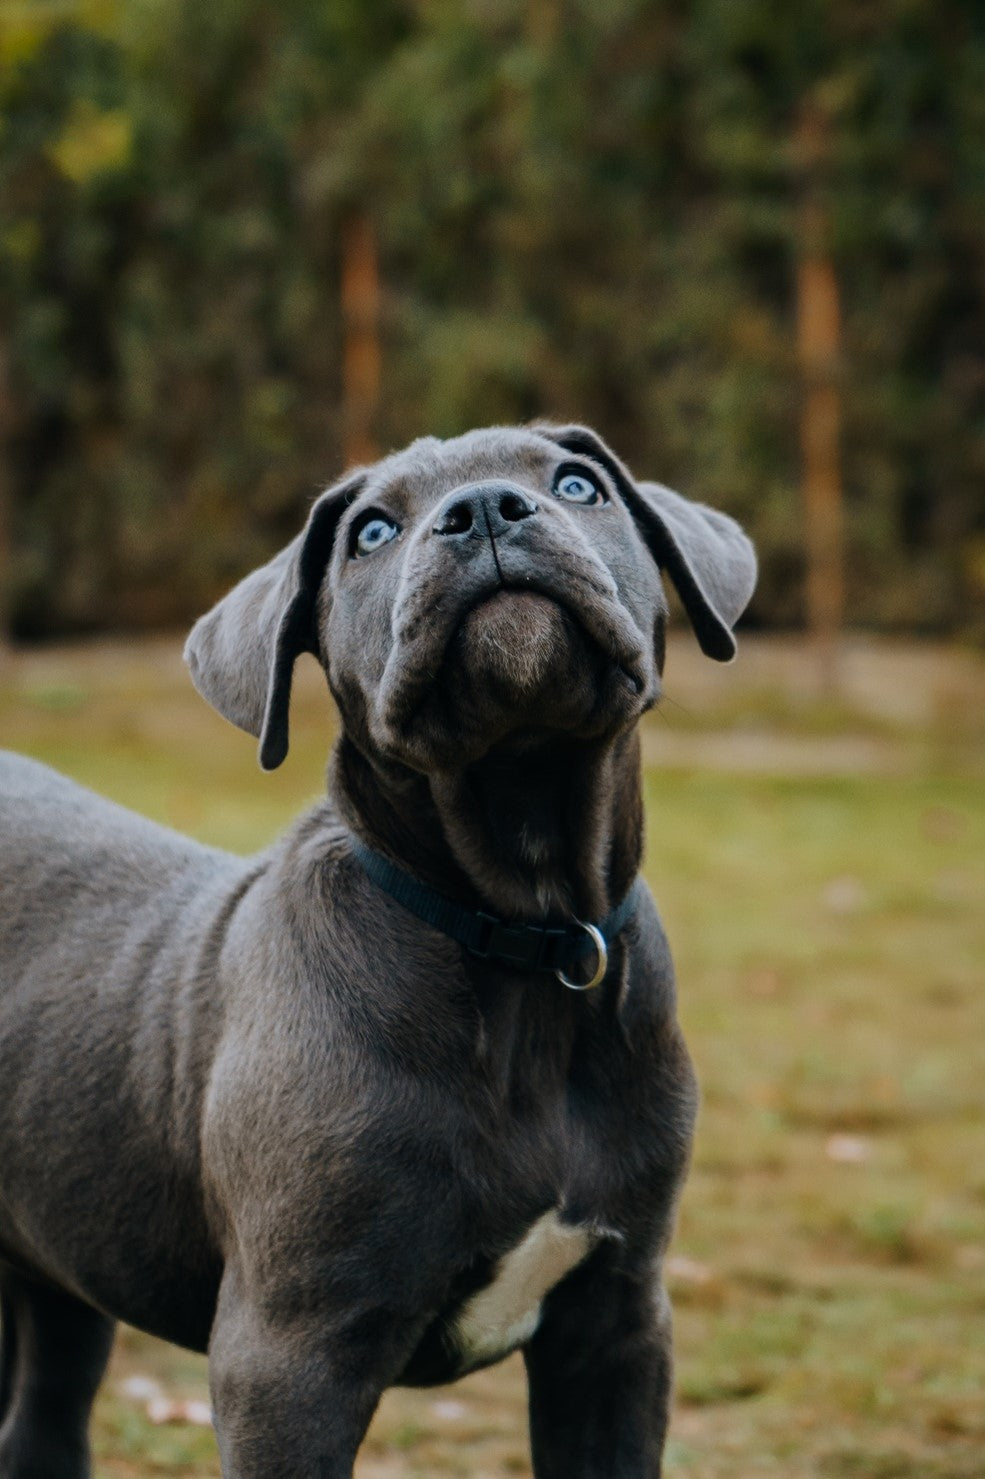 http://www.healthextension.com/cdn/shop/articles/24_-_042722_-_The_Cane_Corso_Guide__History__Personality__Care__Food__and_More_-_PICTURE_35c8a551-baa9-4ebf-a456-0405c62f2ba4.jpg?v=1654546969&width=2048